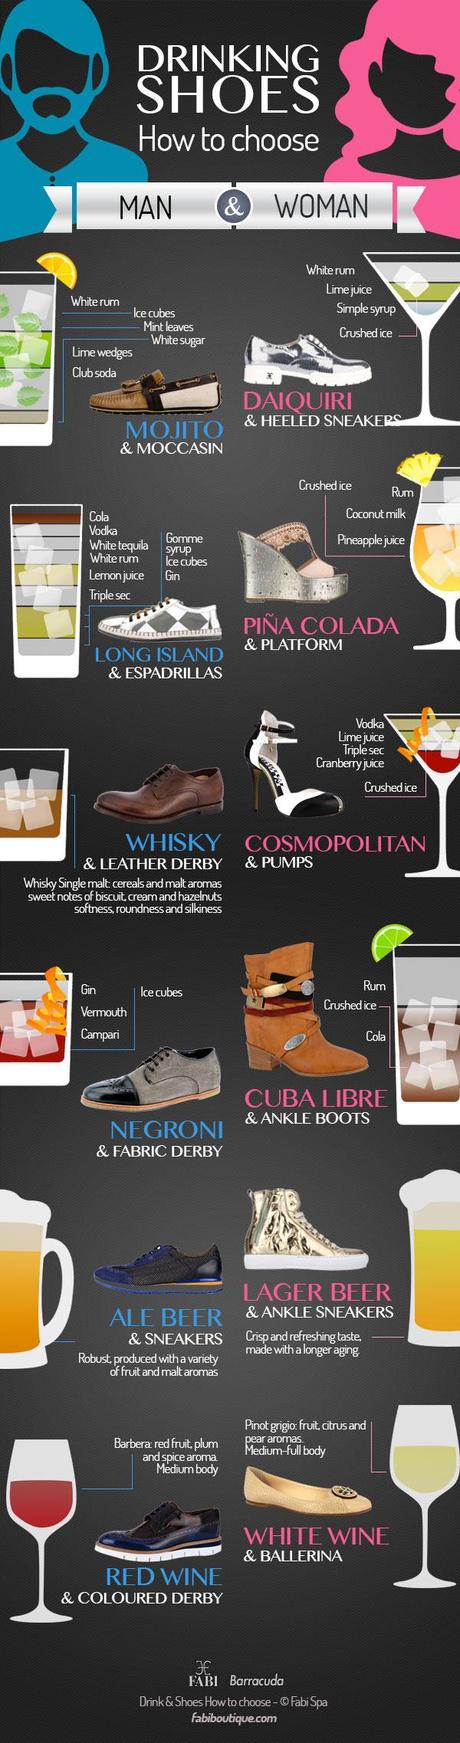 Drinking shoes: how to choose